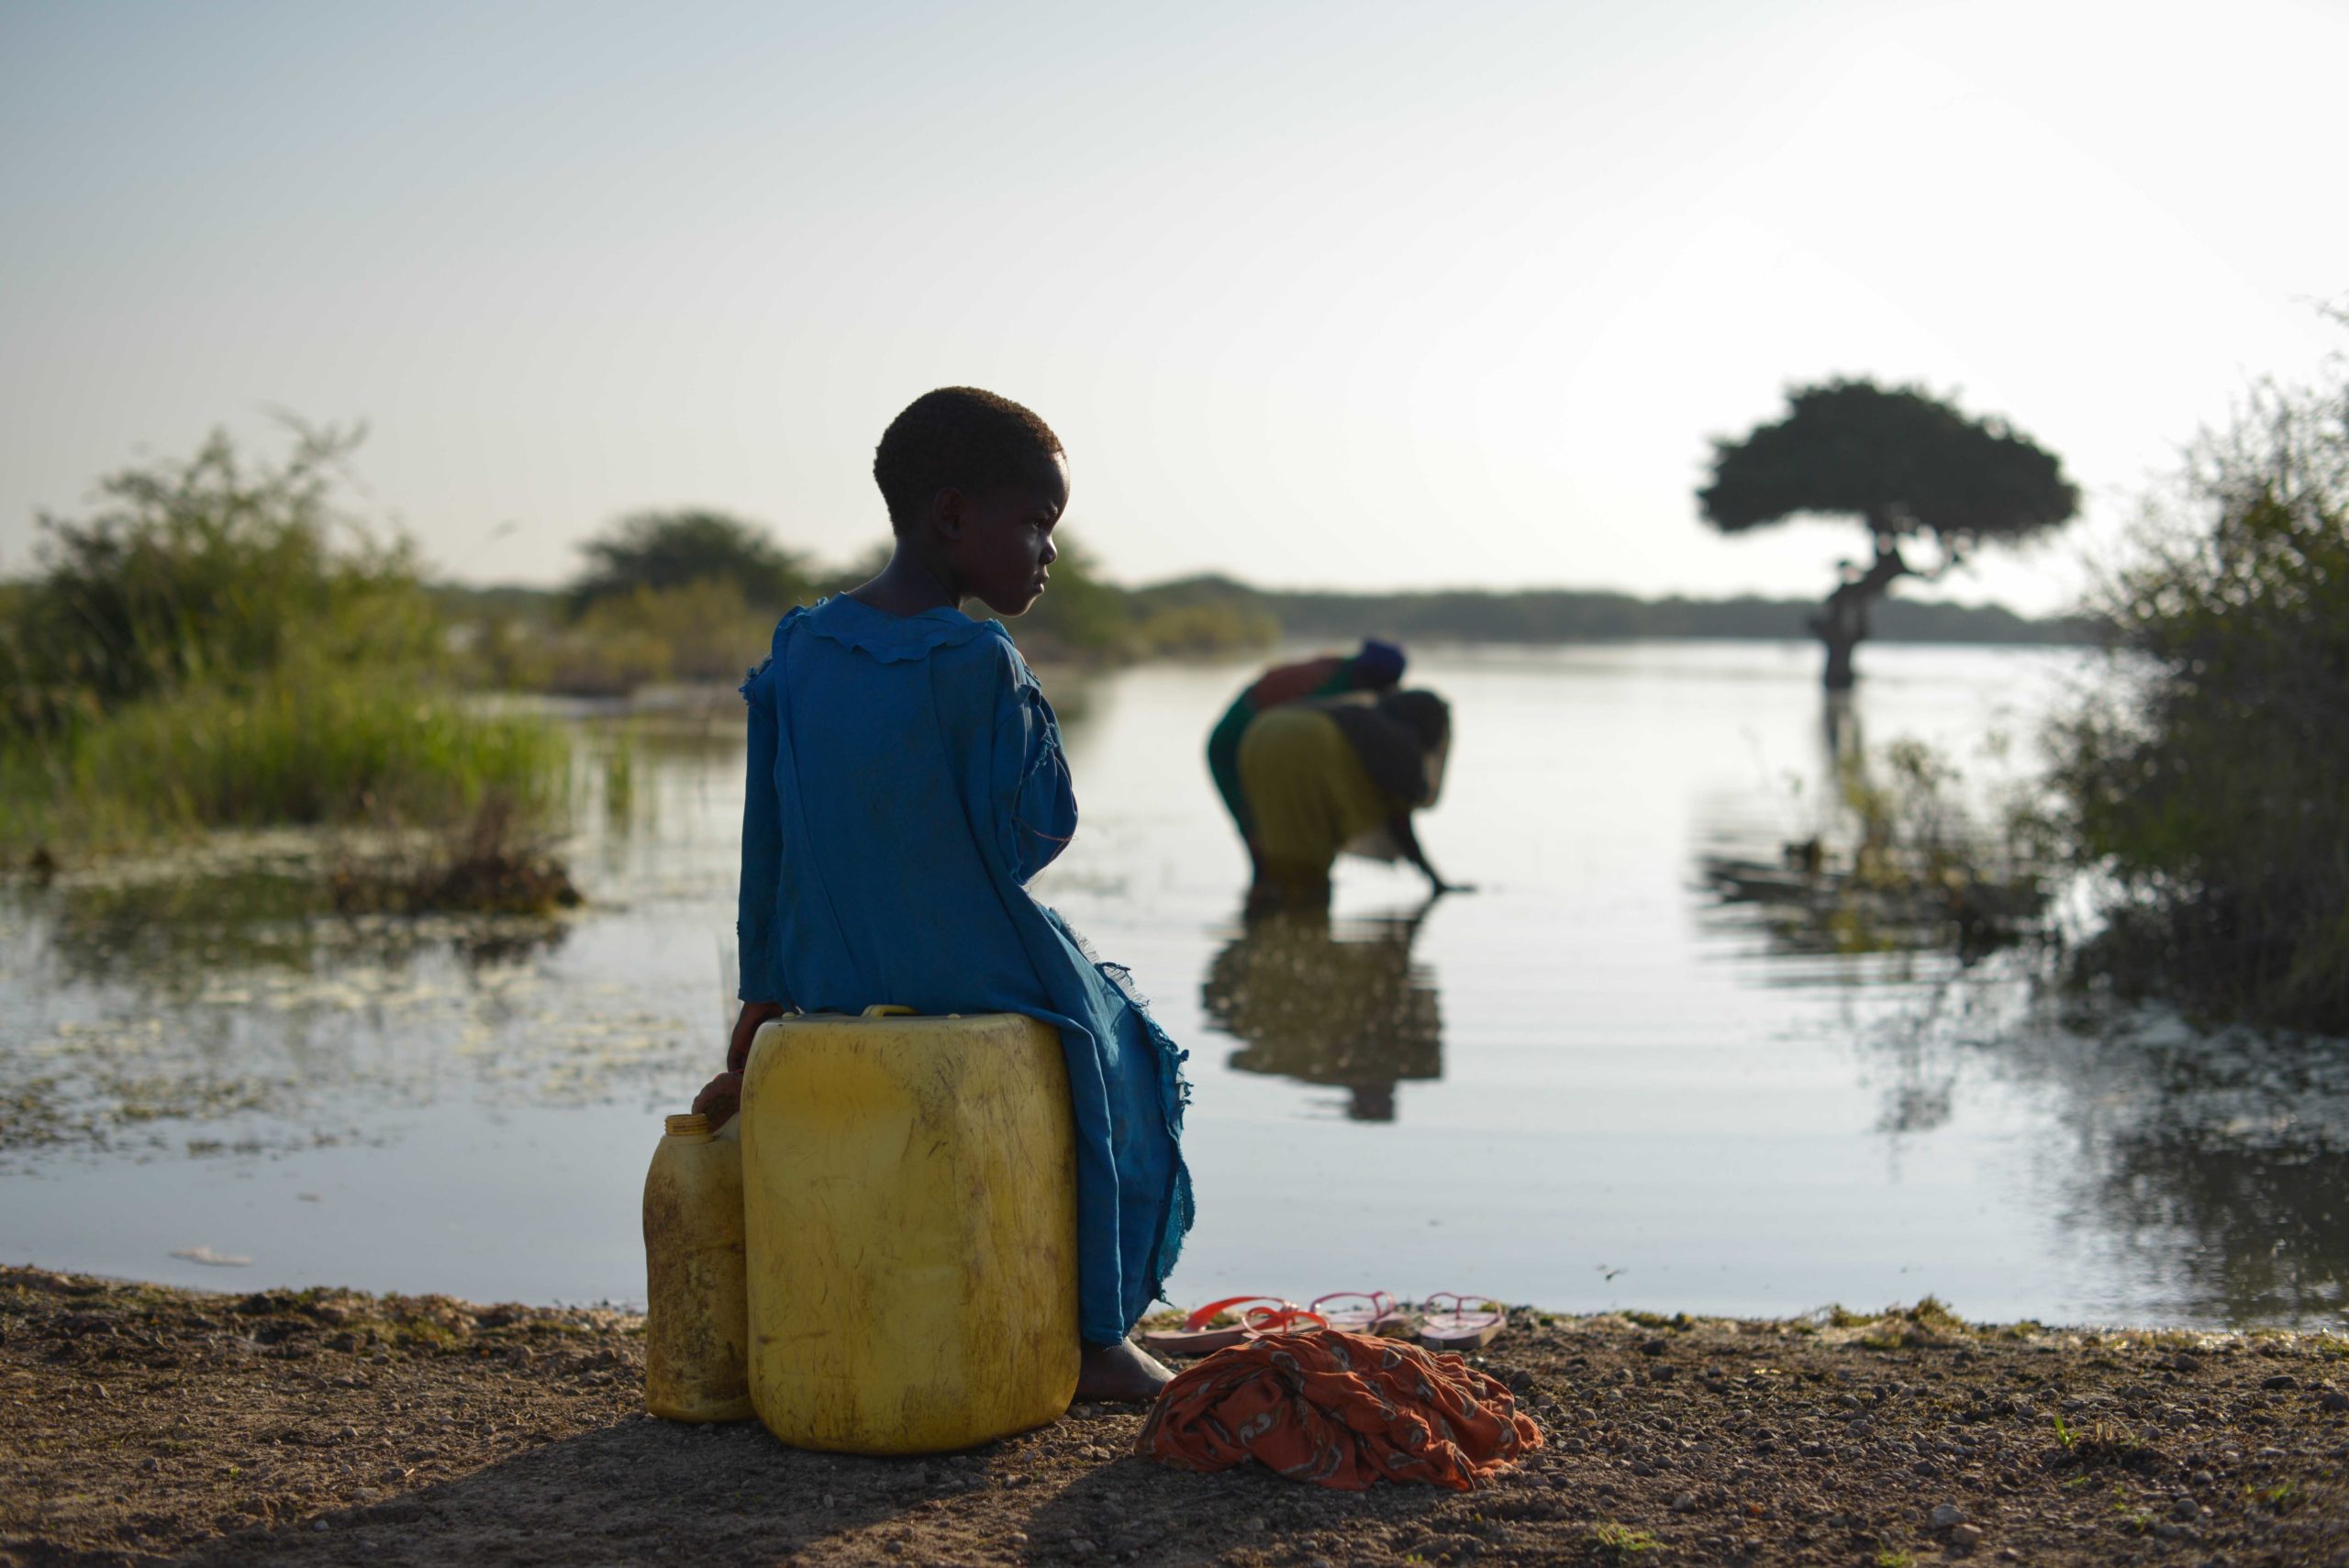 A young girl sits on a jerry can, as her mother fills up another with water, near the town of Jowhar, Somalia, on December 15. The area around Jowhar has experienced large amounts of flooding this year, completely blocking off the town from main roads and forcing thousands to flee their homes and seek shelter on higher ground. AU UN IST PHOTO / Tobin Jones